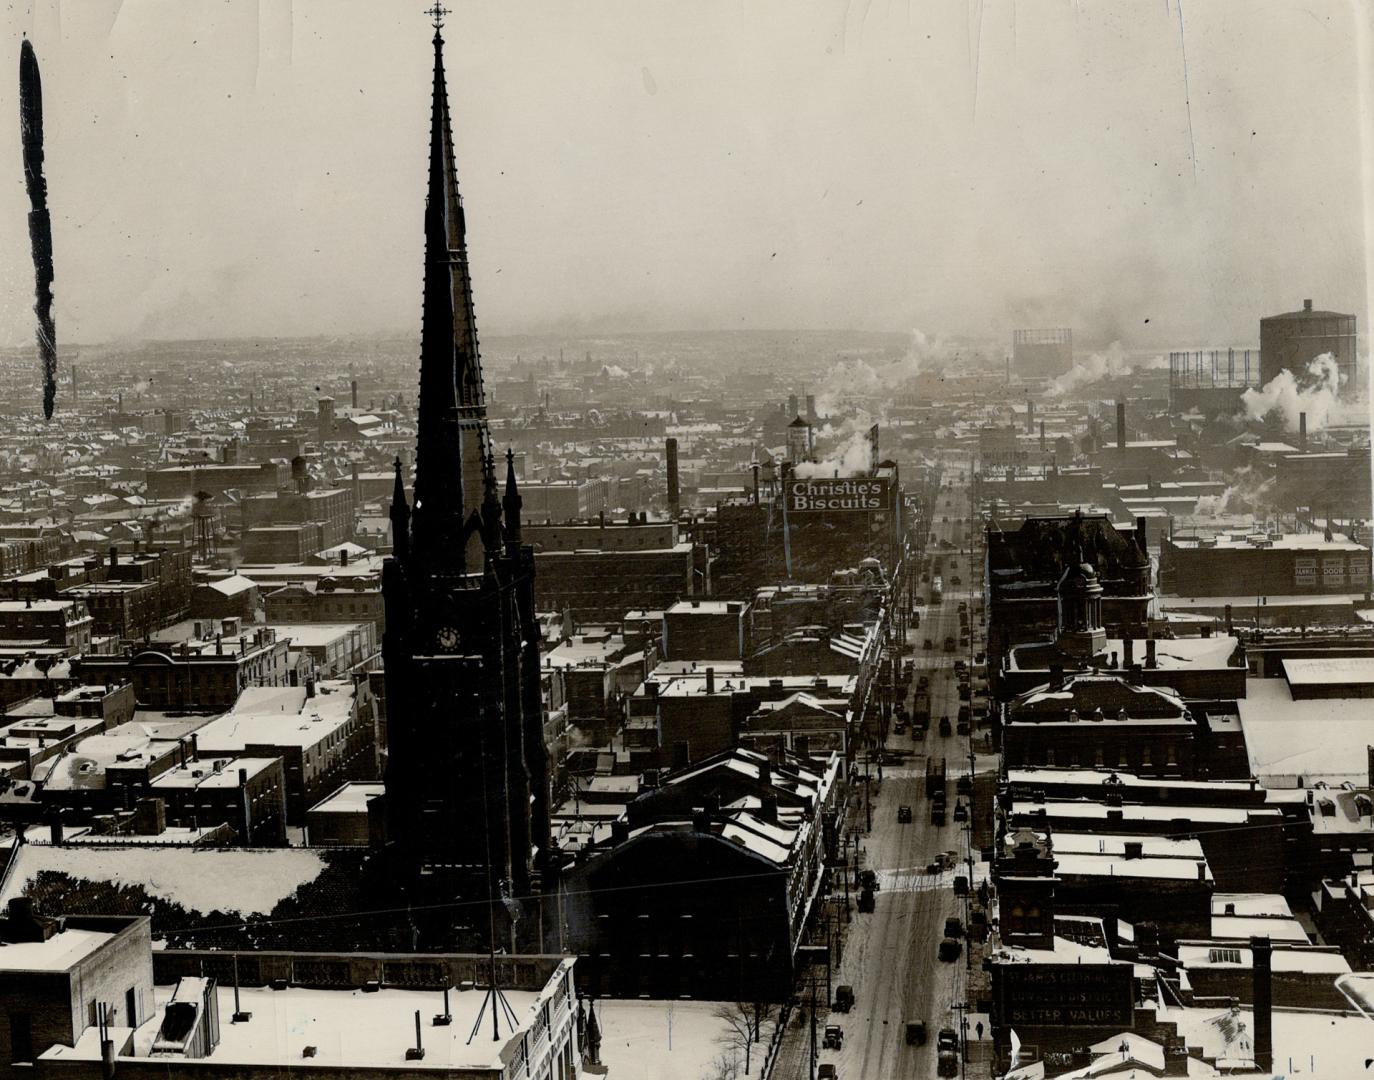 The photograph here, taken from a tall building, shows King St